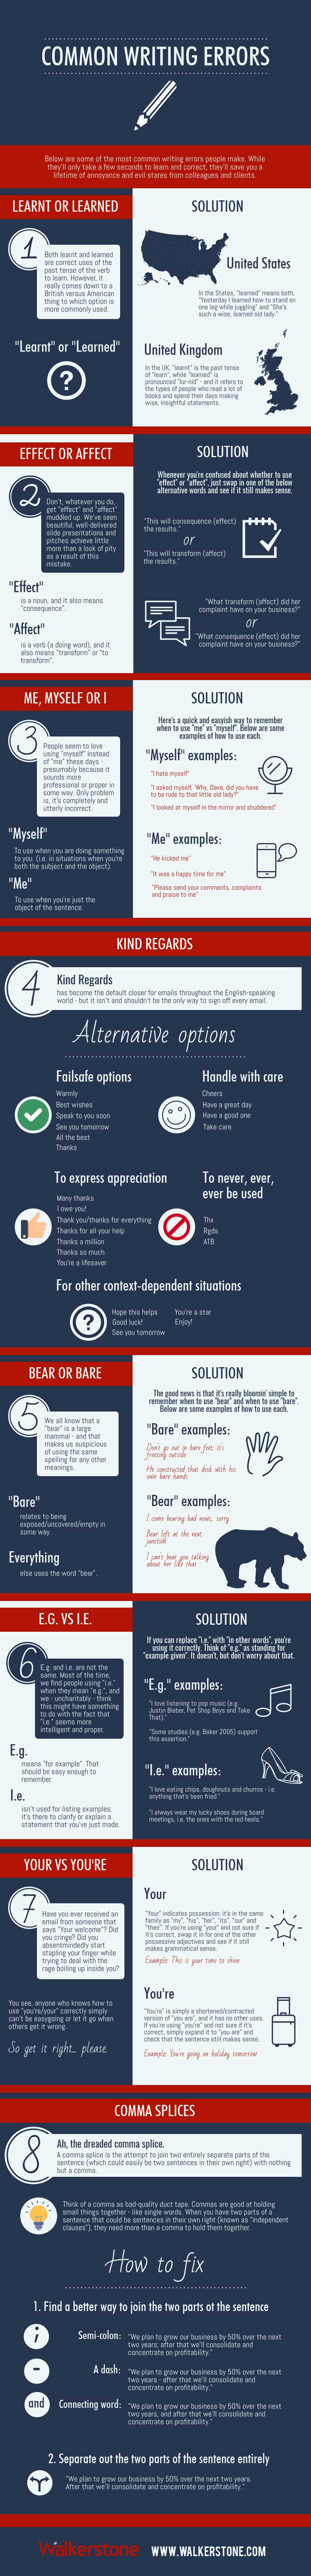 Here Are Some Common Writing Errors Students Should Avoid (Infographic)